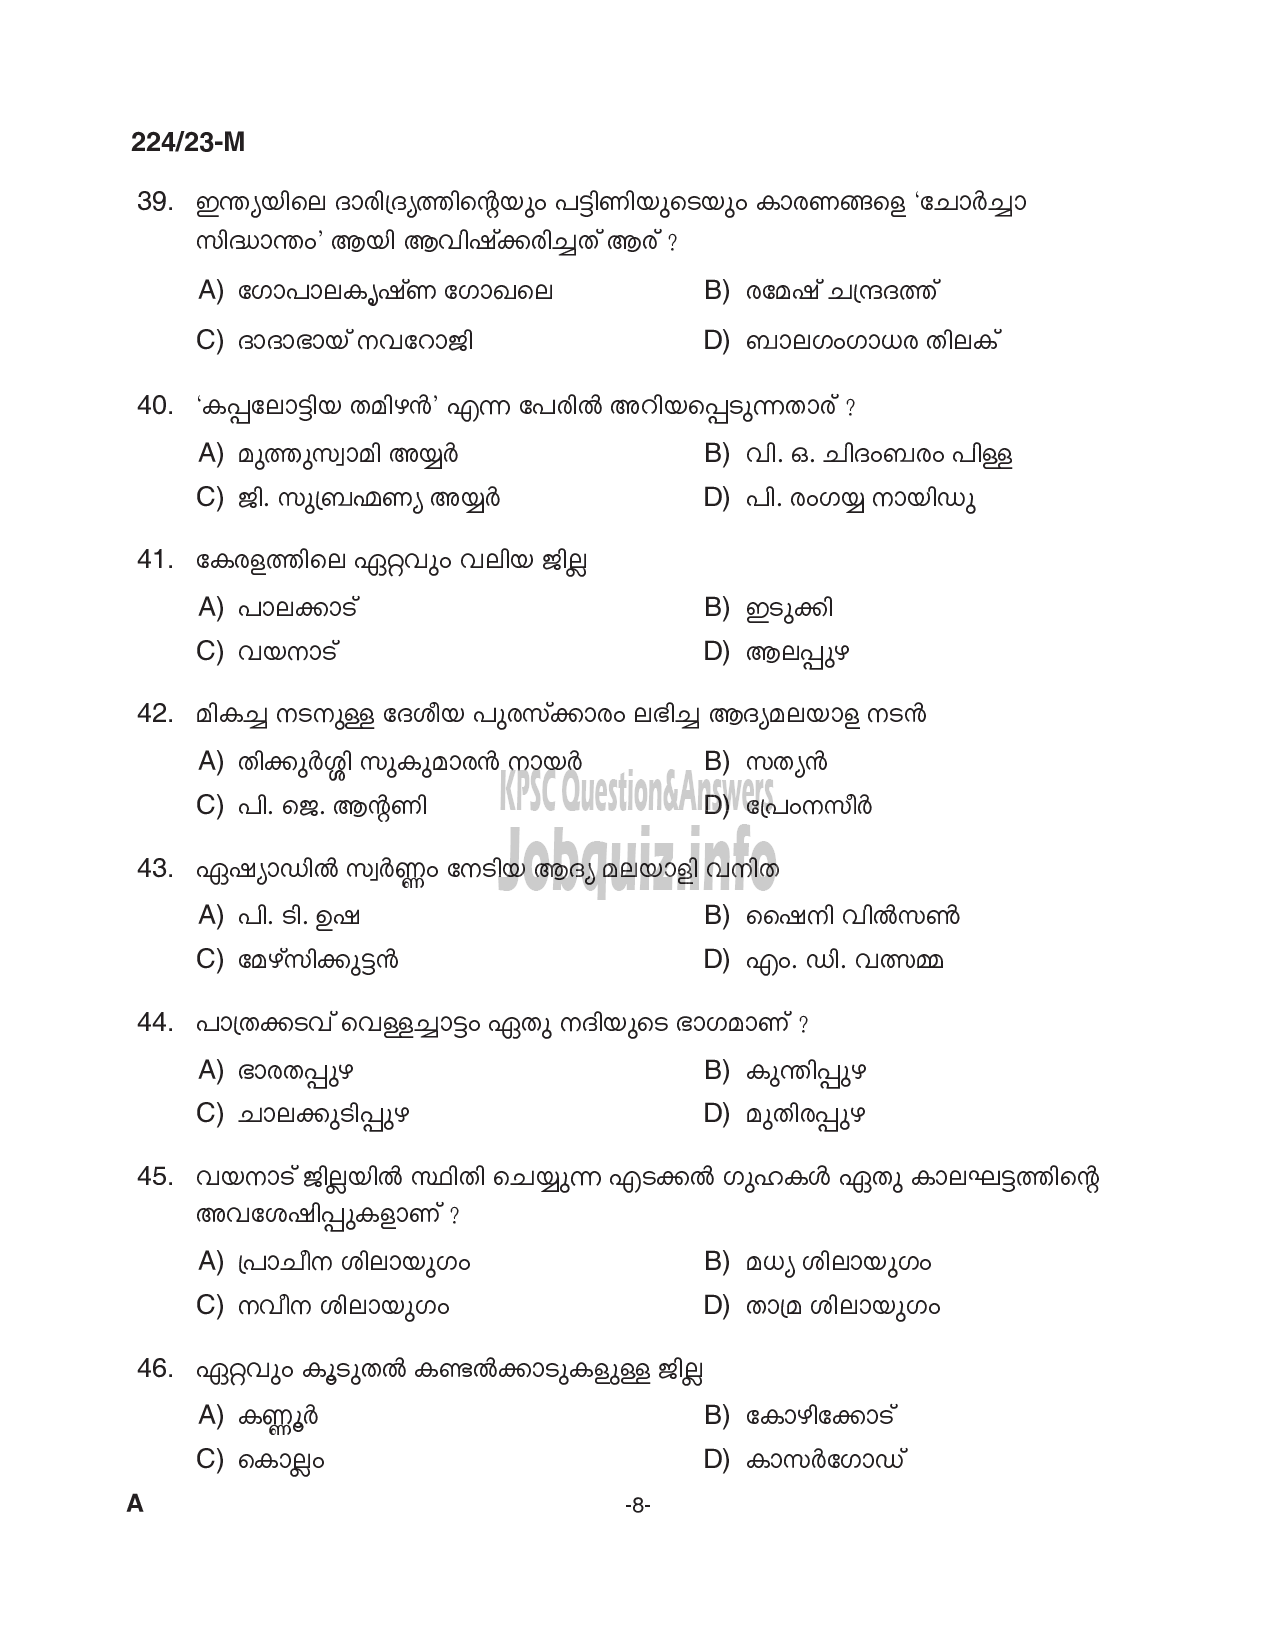 Kerala PSC Question Paper -  LD Clerk/ Accountant/ Cashier etc (Preliminary Examination- Stage II)-8